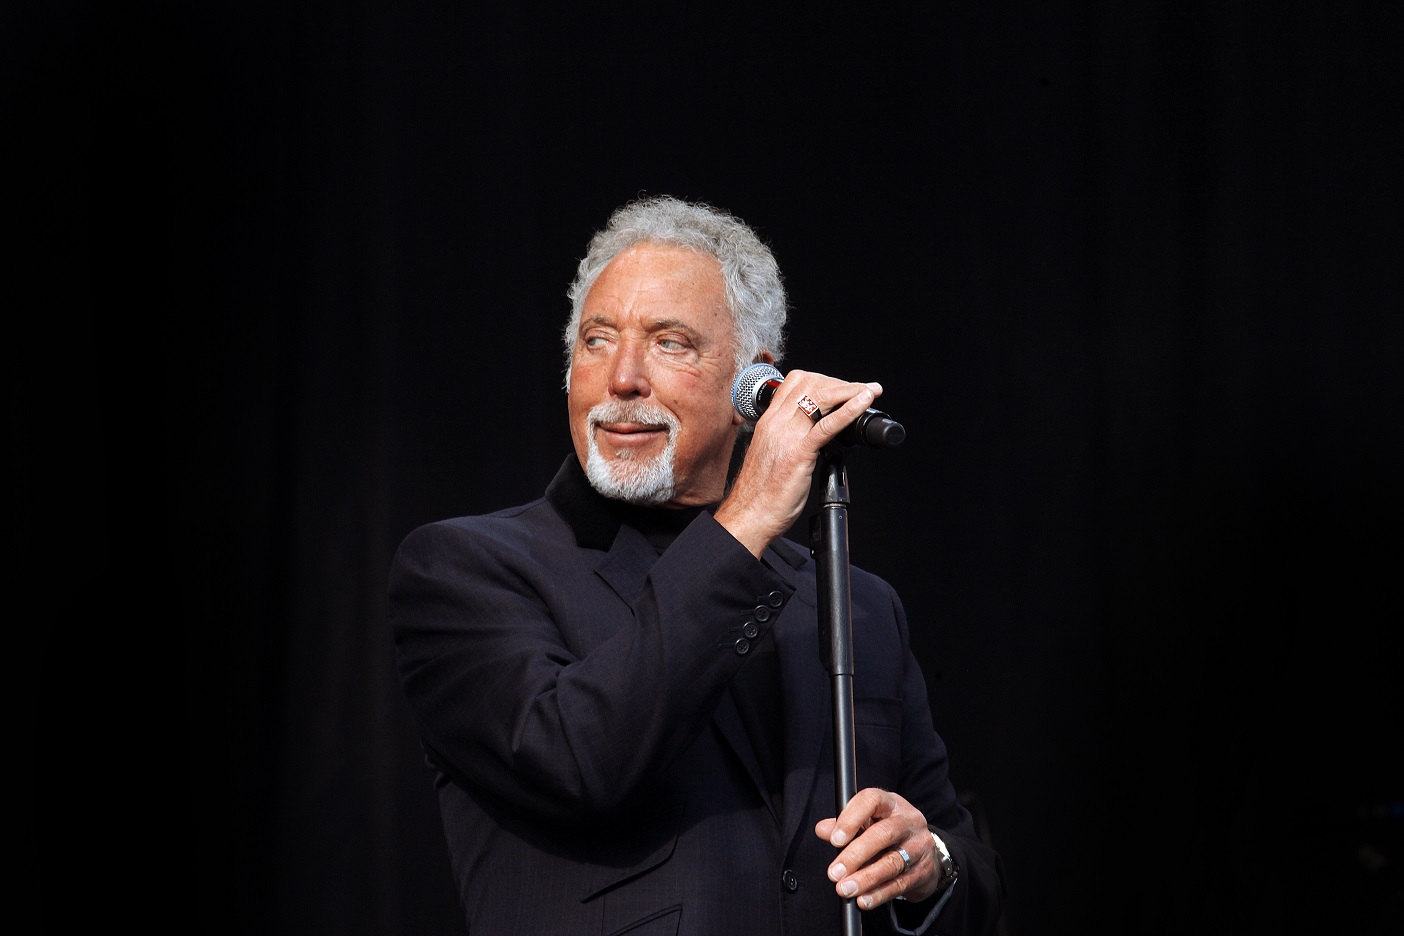 Tom Jones plays at T in the Park on the 7th July 2011